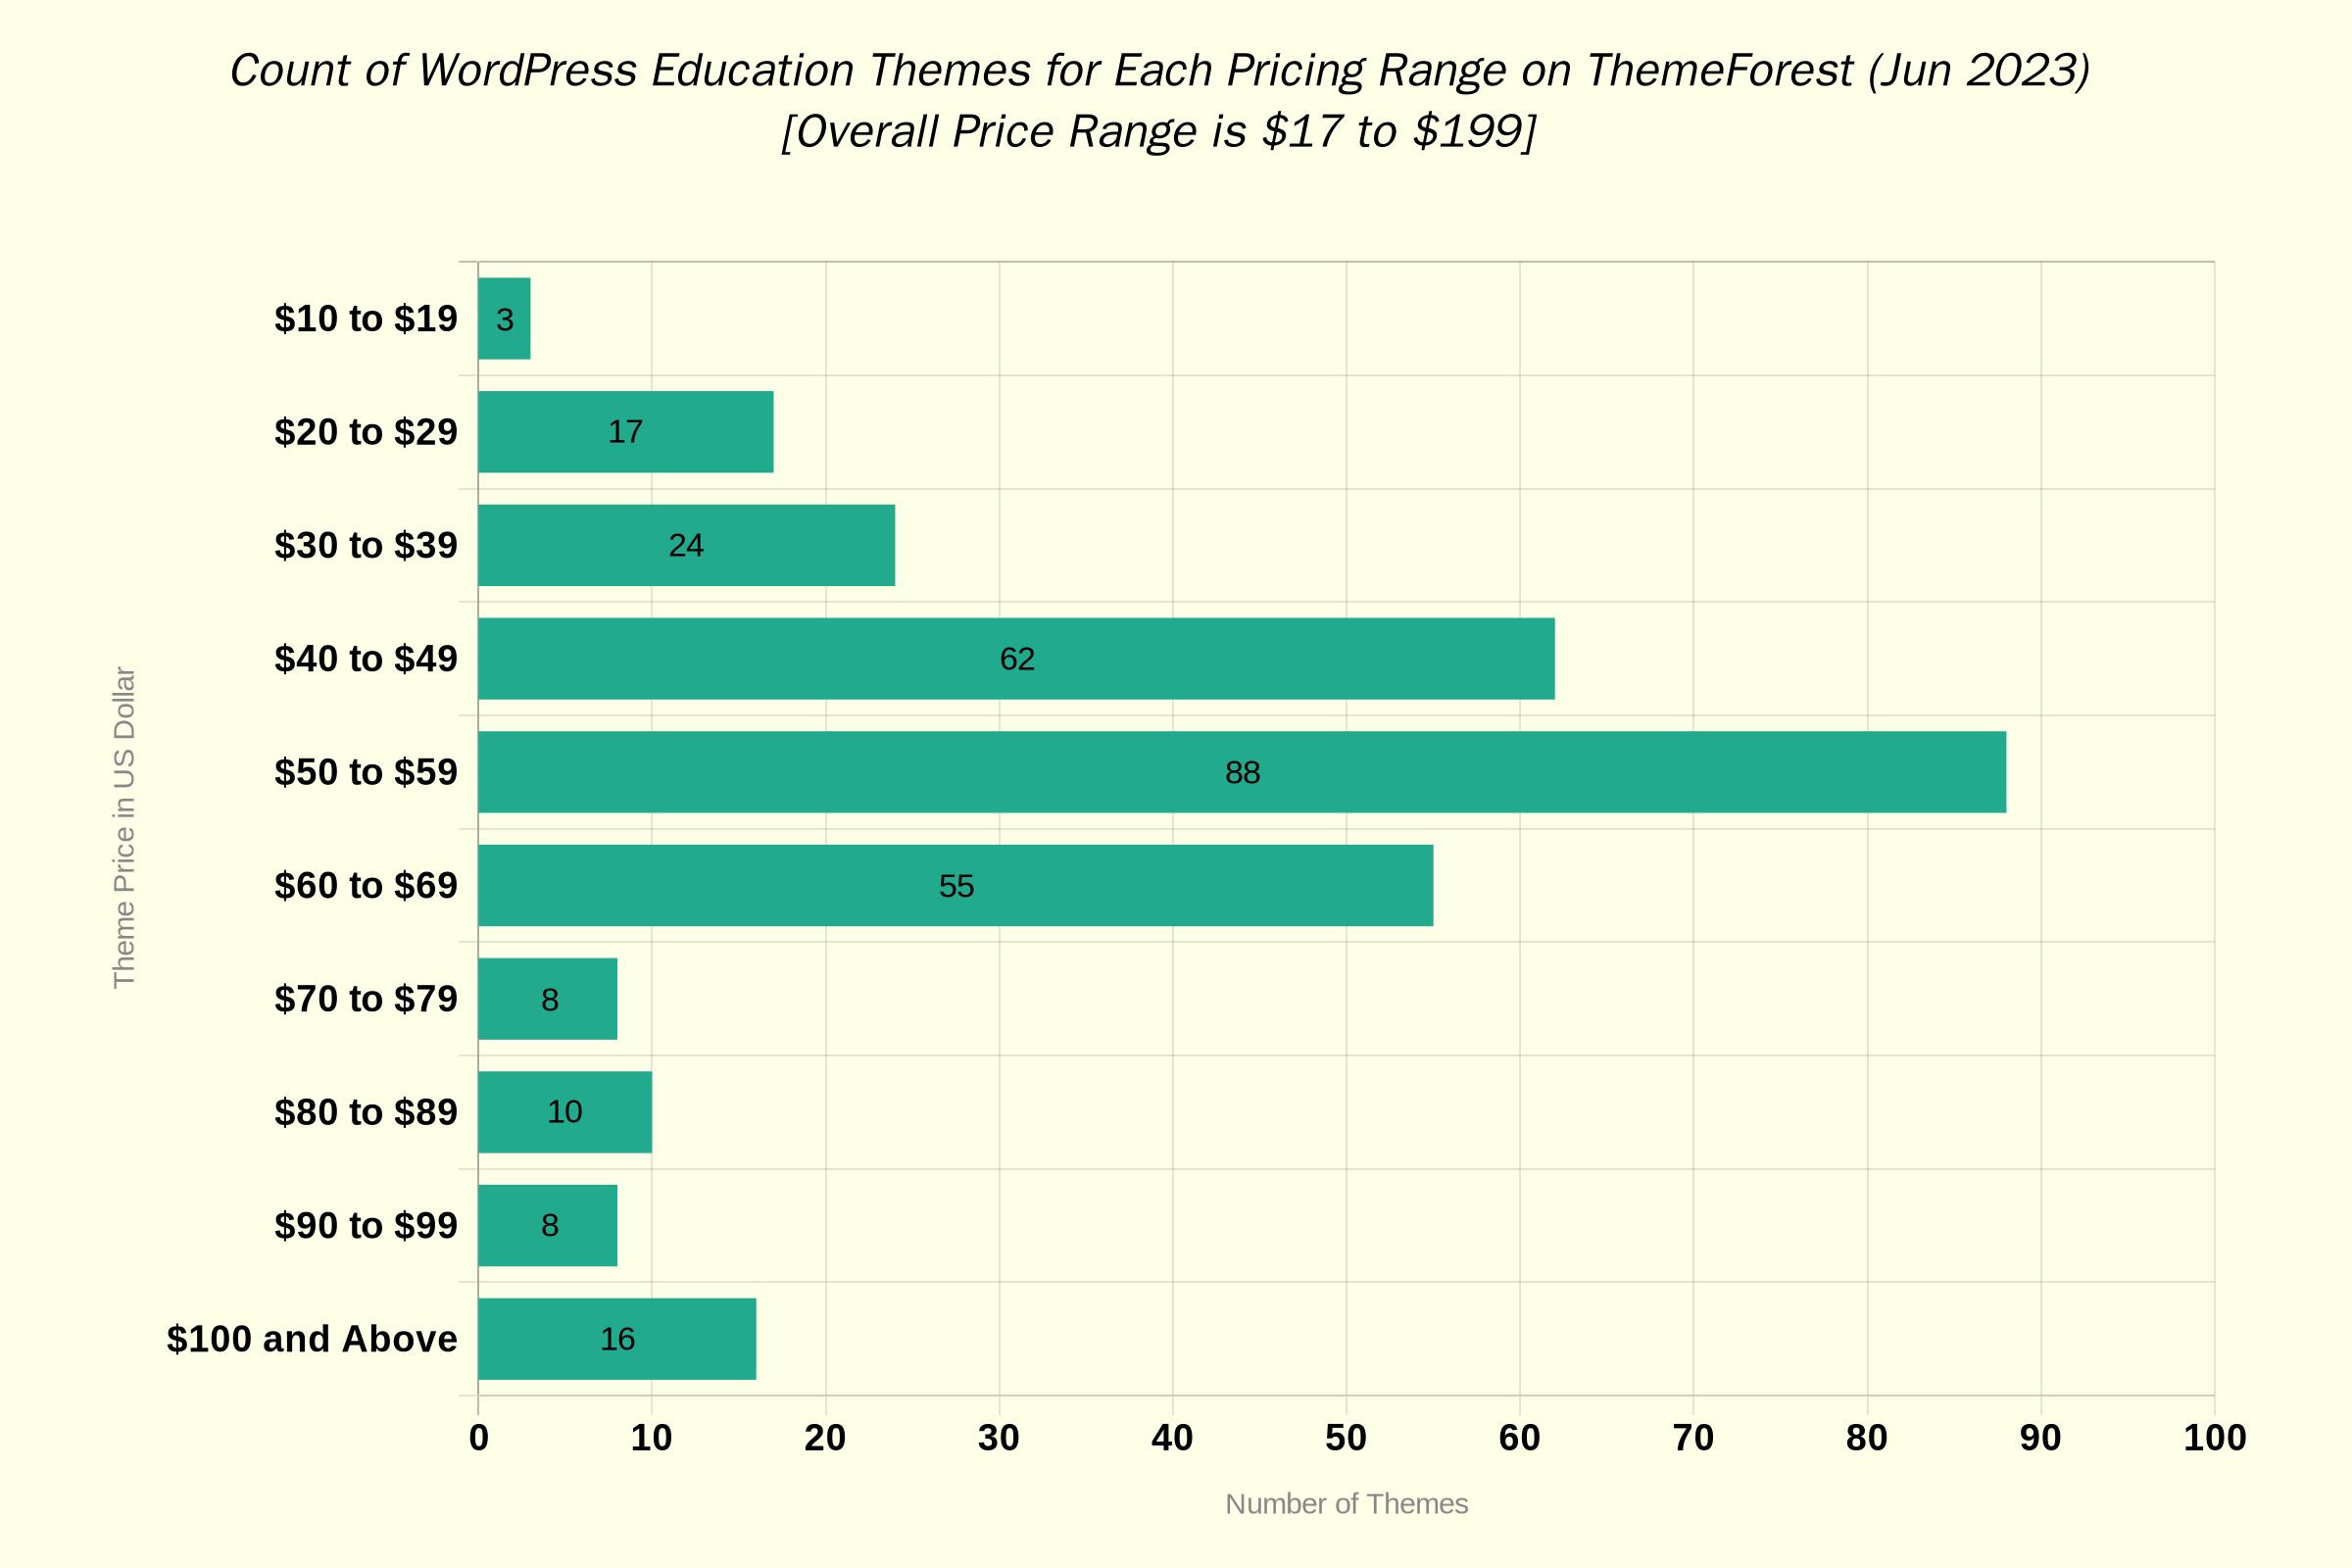 Count of WordPress education themes for each price range on ThemeForest